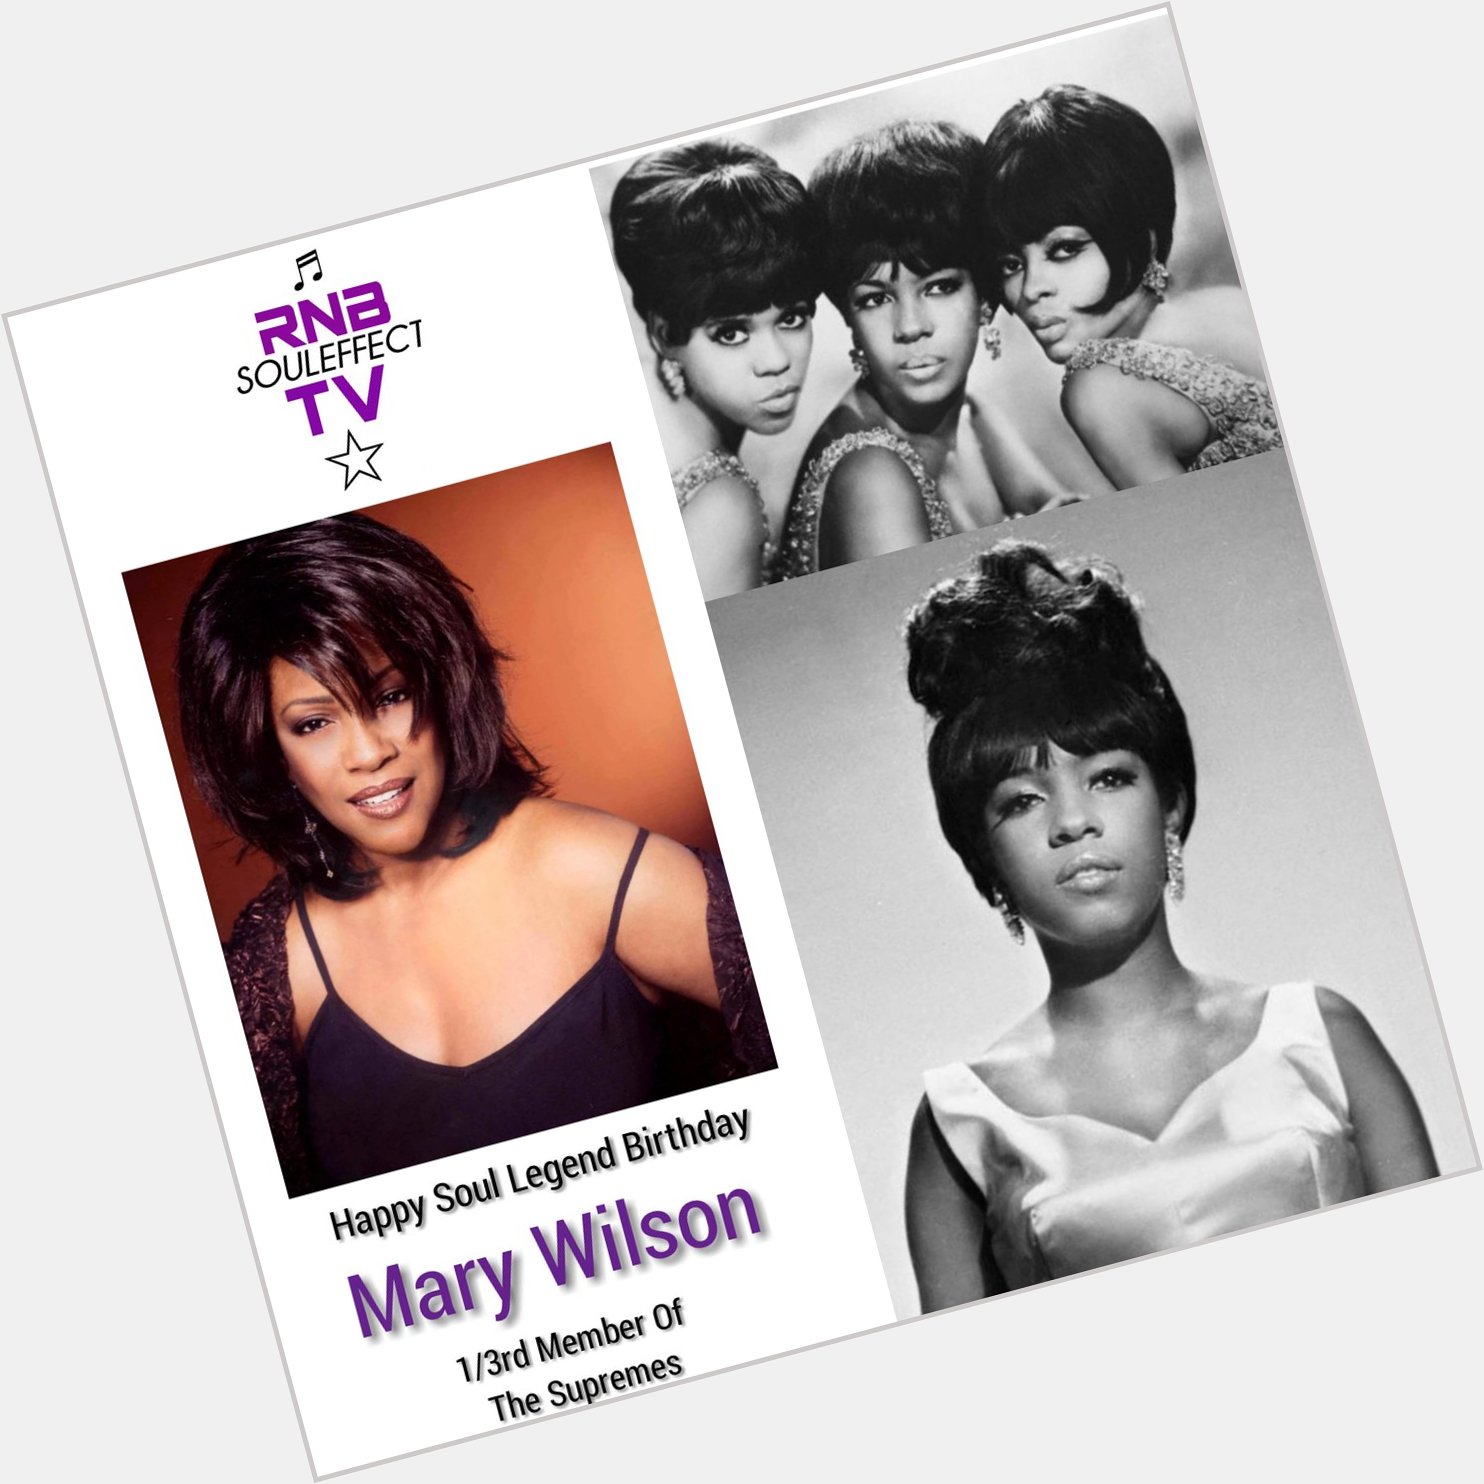 Happy Soul Legend Birthday Mary Wilson 1/3rd Member Of The Supremes 